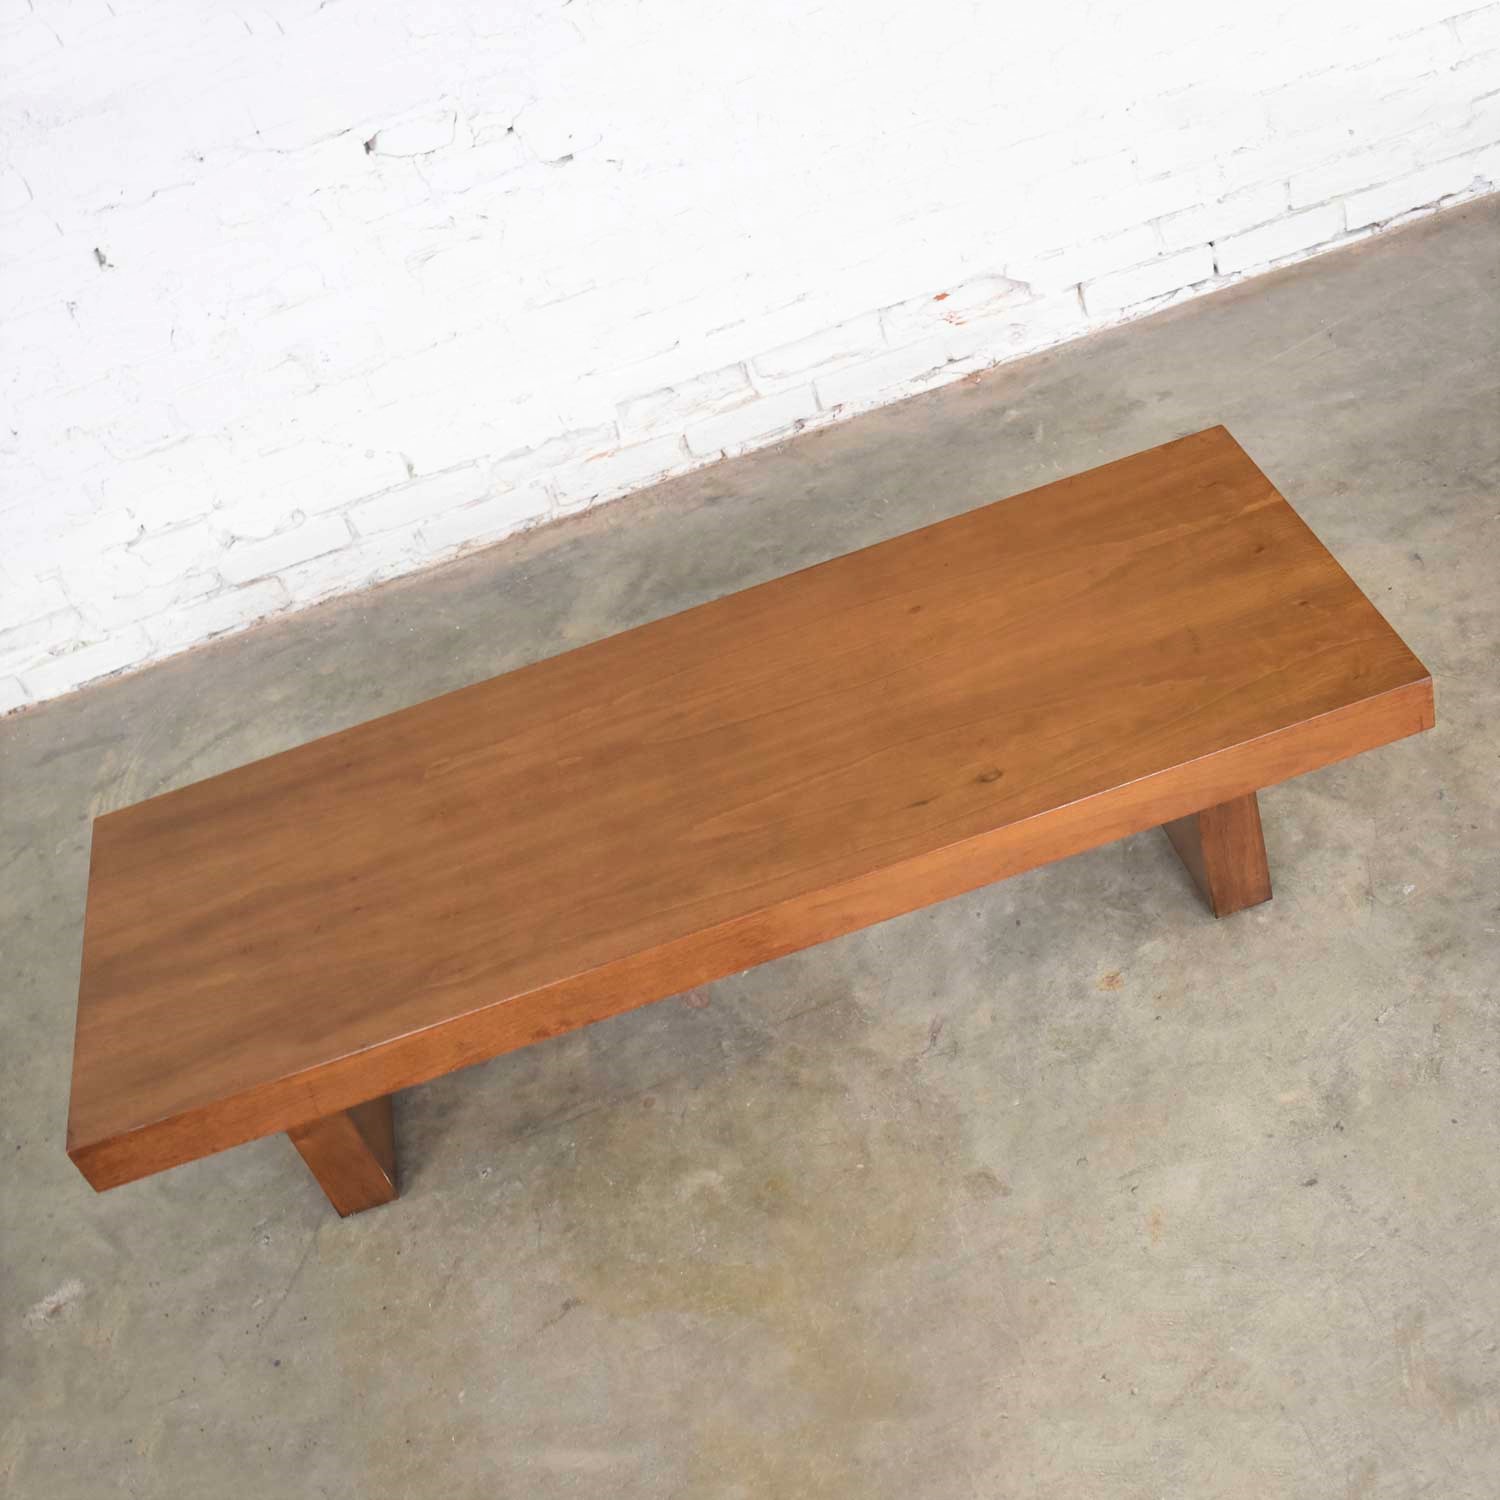 Show-Pieces Mid Century Modern or Asian Low Coffee or Teahouse Table Bench in Walnut